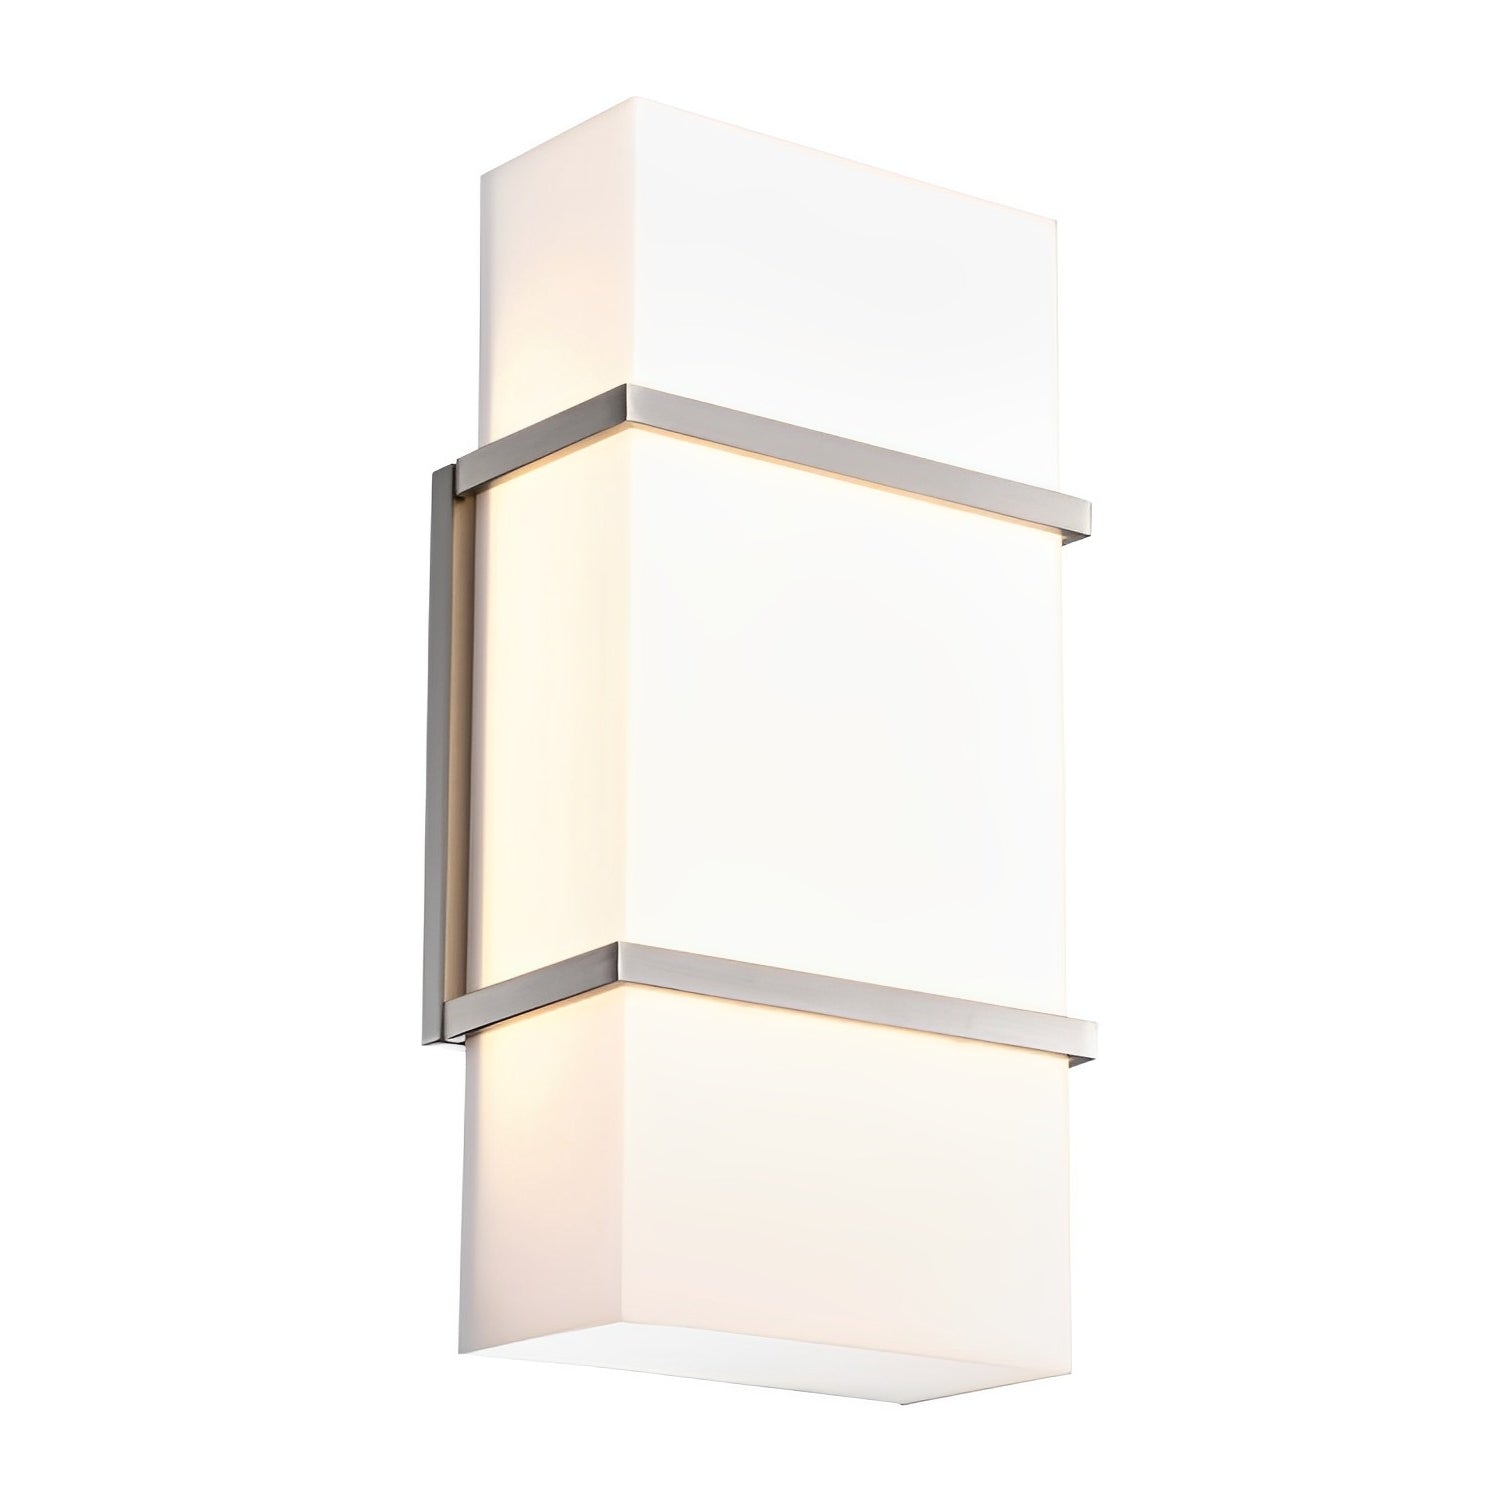 Image of modern wall light fixture, home fixture or LED wall light